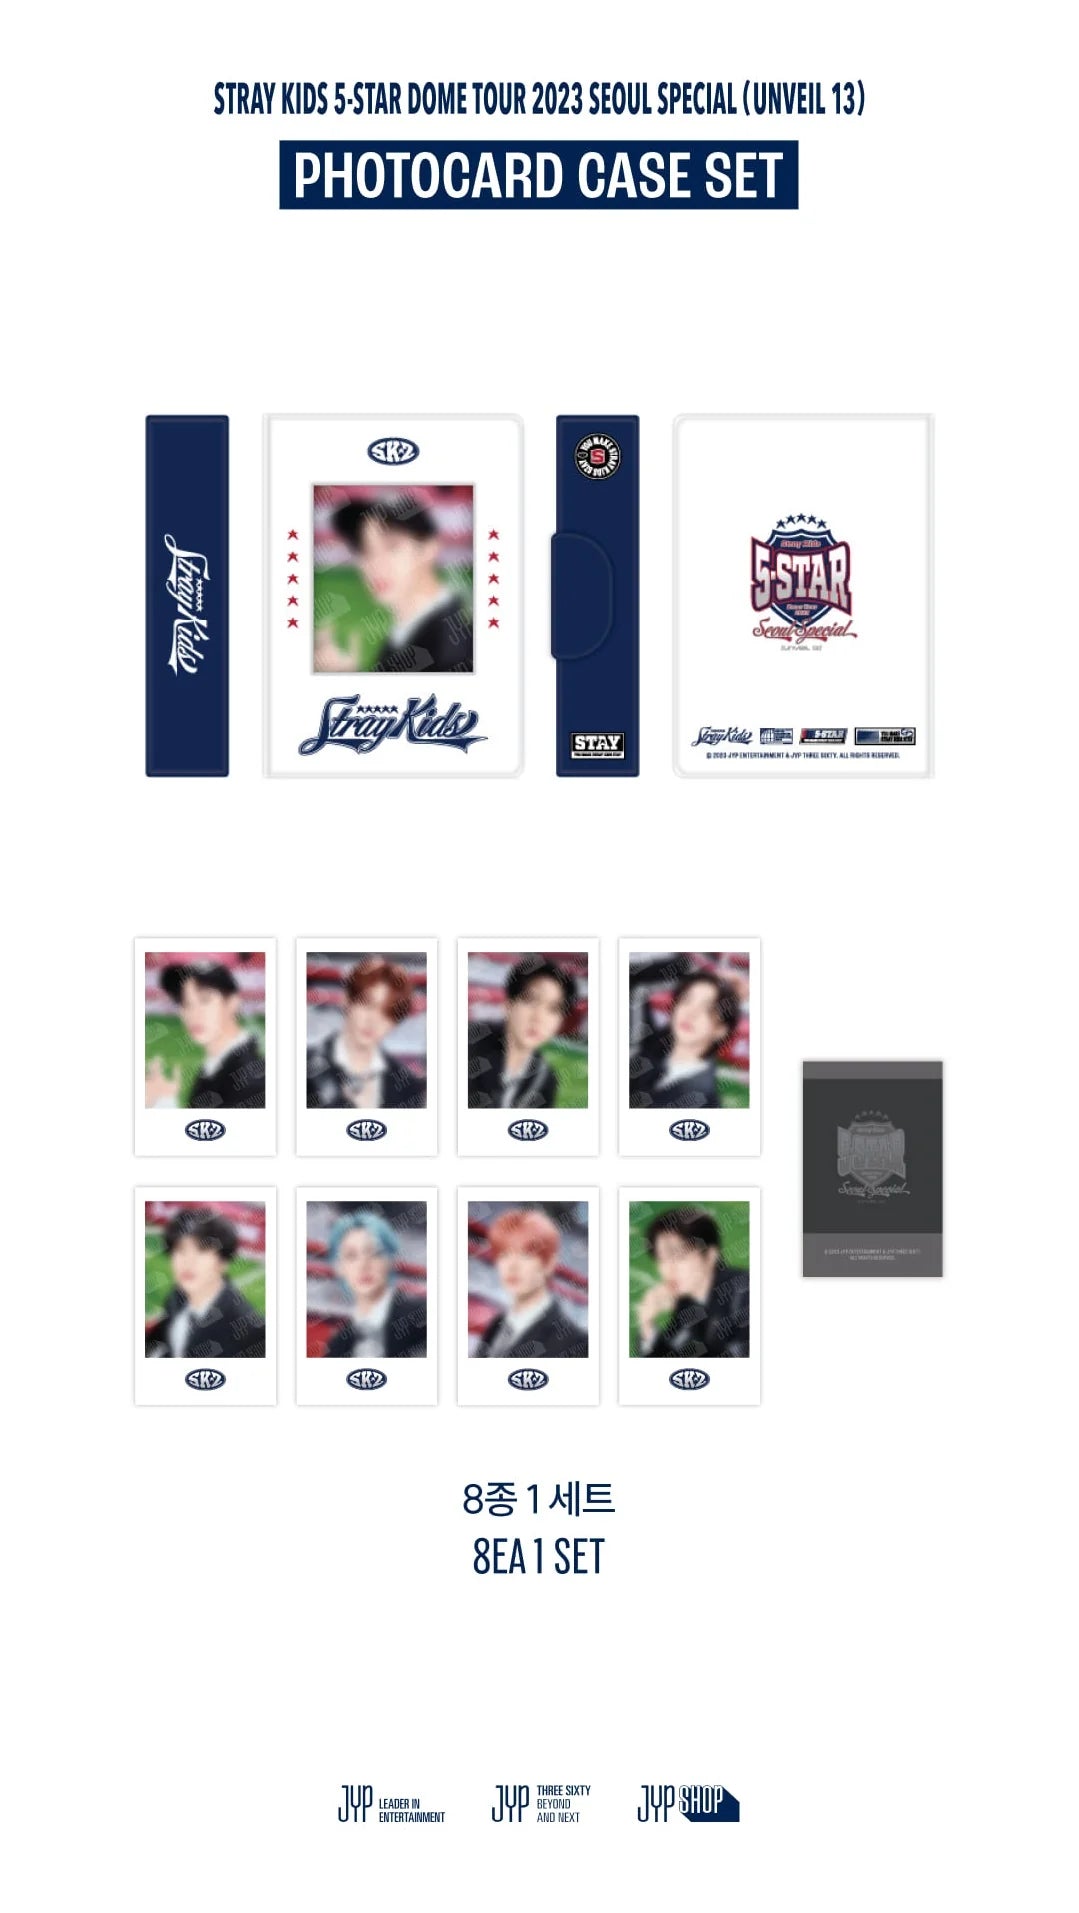 Stray Kids 5-Star★★★★★: Dome Tour 2023 Seoul Special (Unveil 13) Official Photocard Case Set